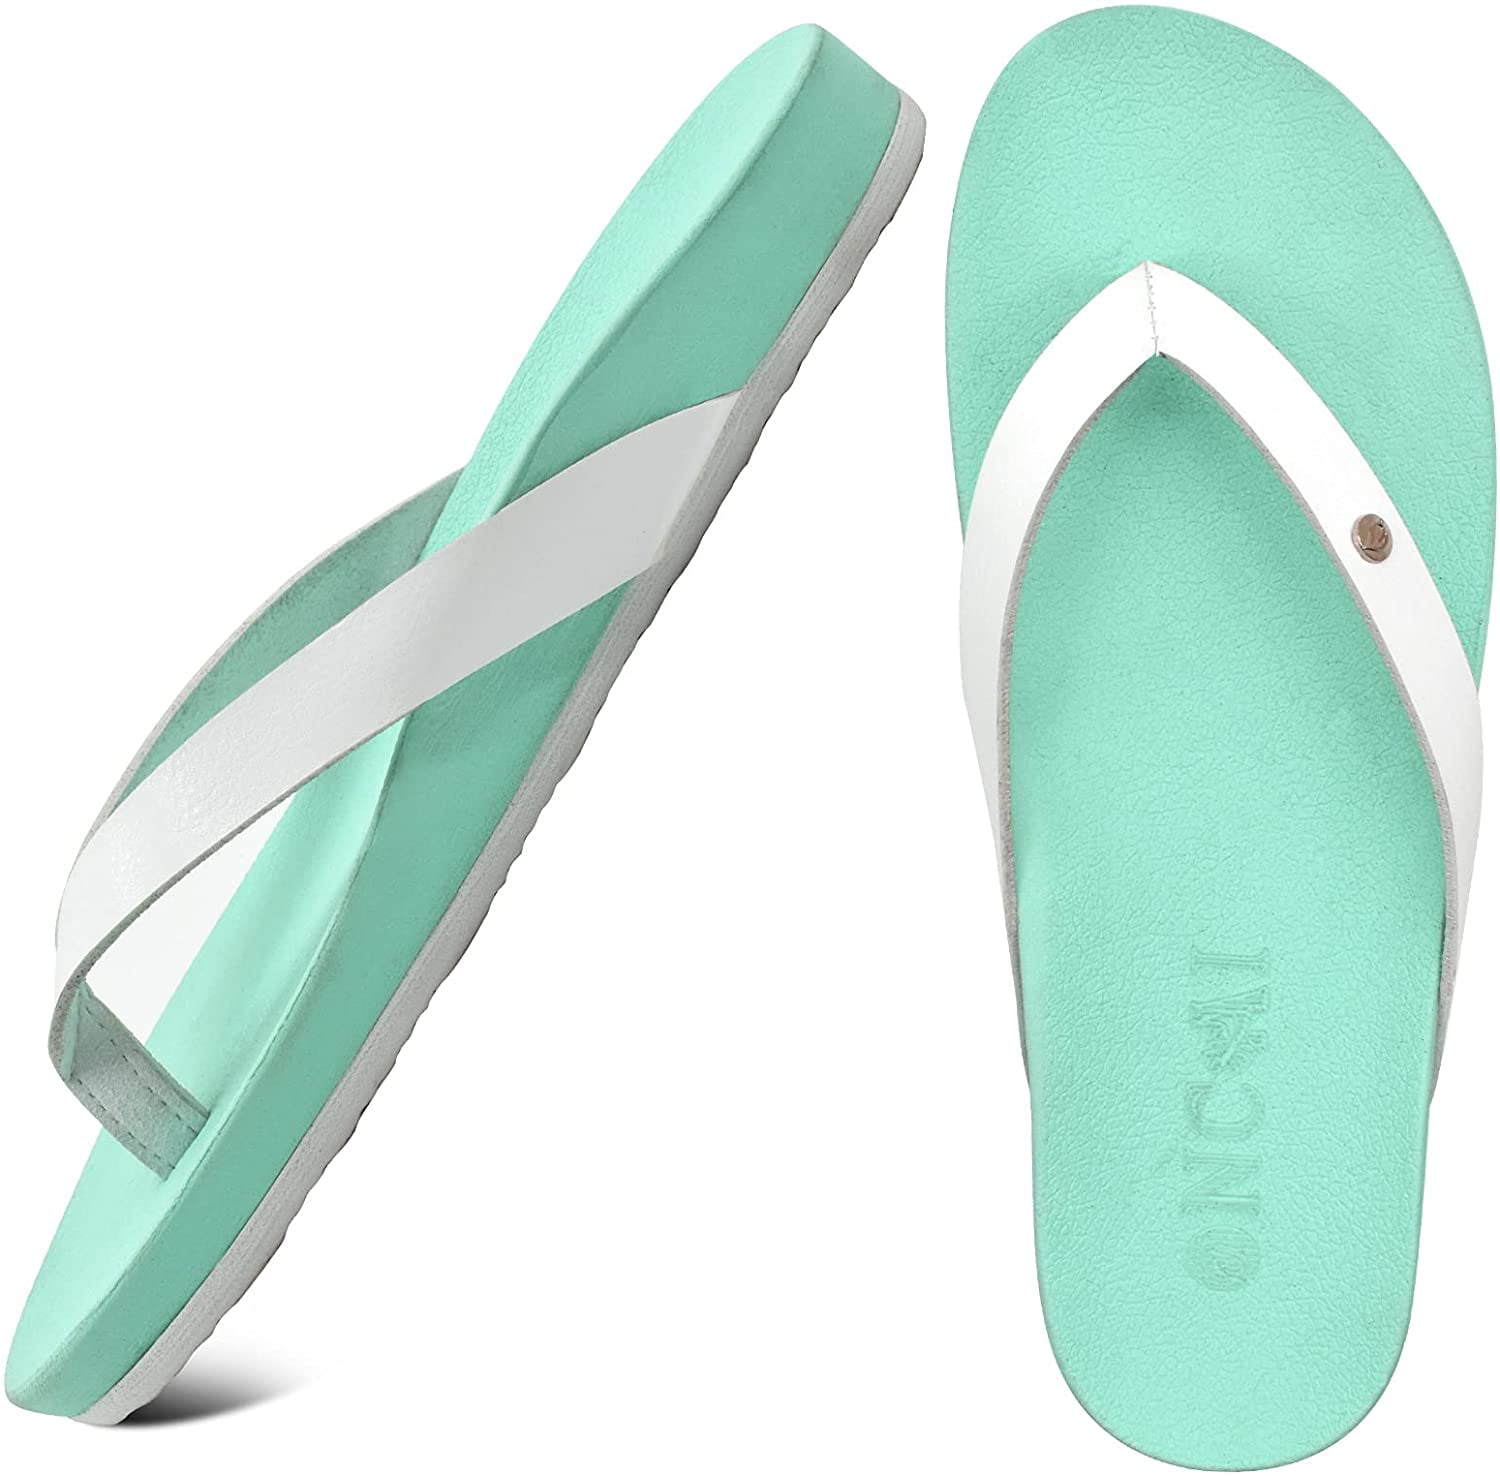 ONCAI Womens Flip Flops,Summer Beach Leather Strap Comfortable Arch Support Thong Sandals with Orthotic Plantar Fasciitis Yoga Foam Rubber Soles Size 5-12 